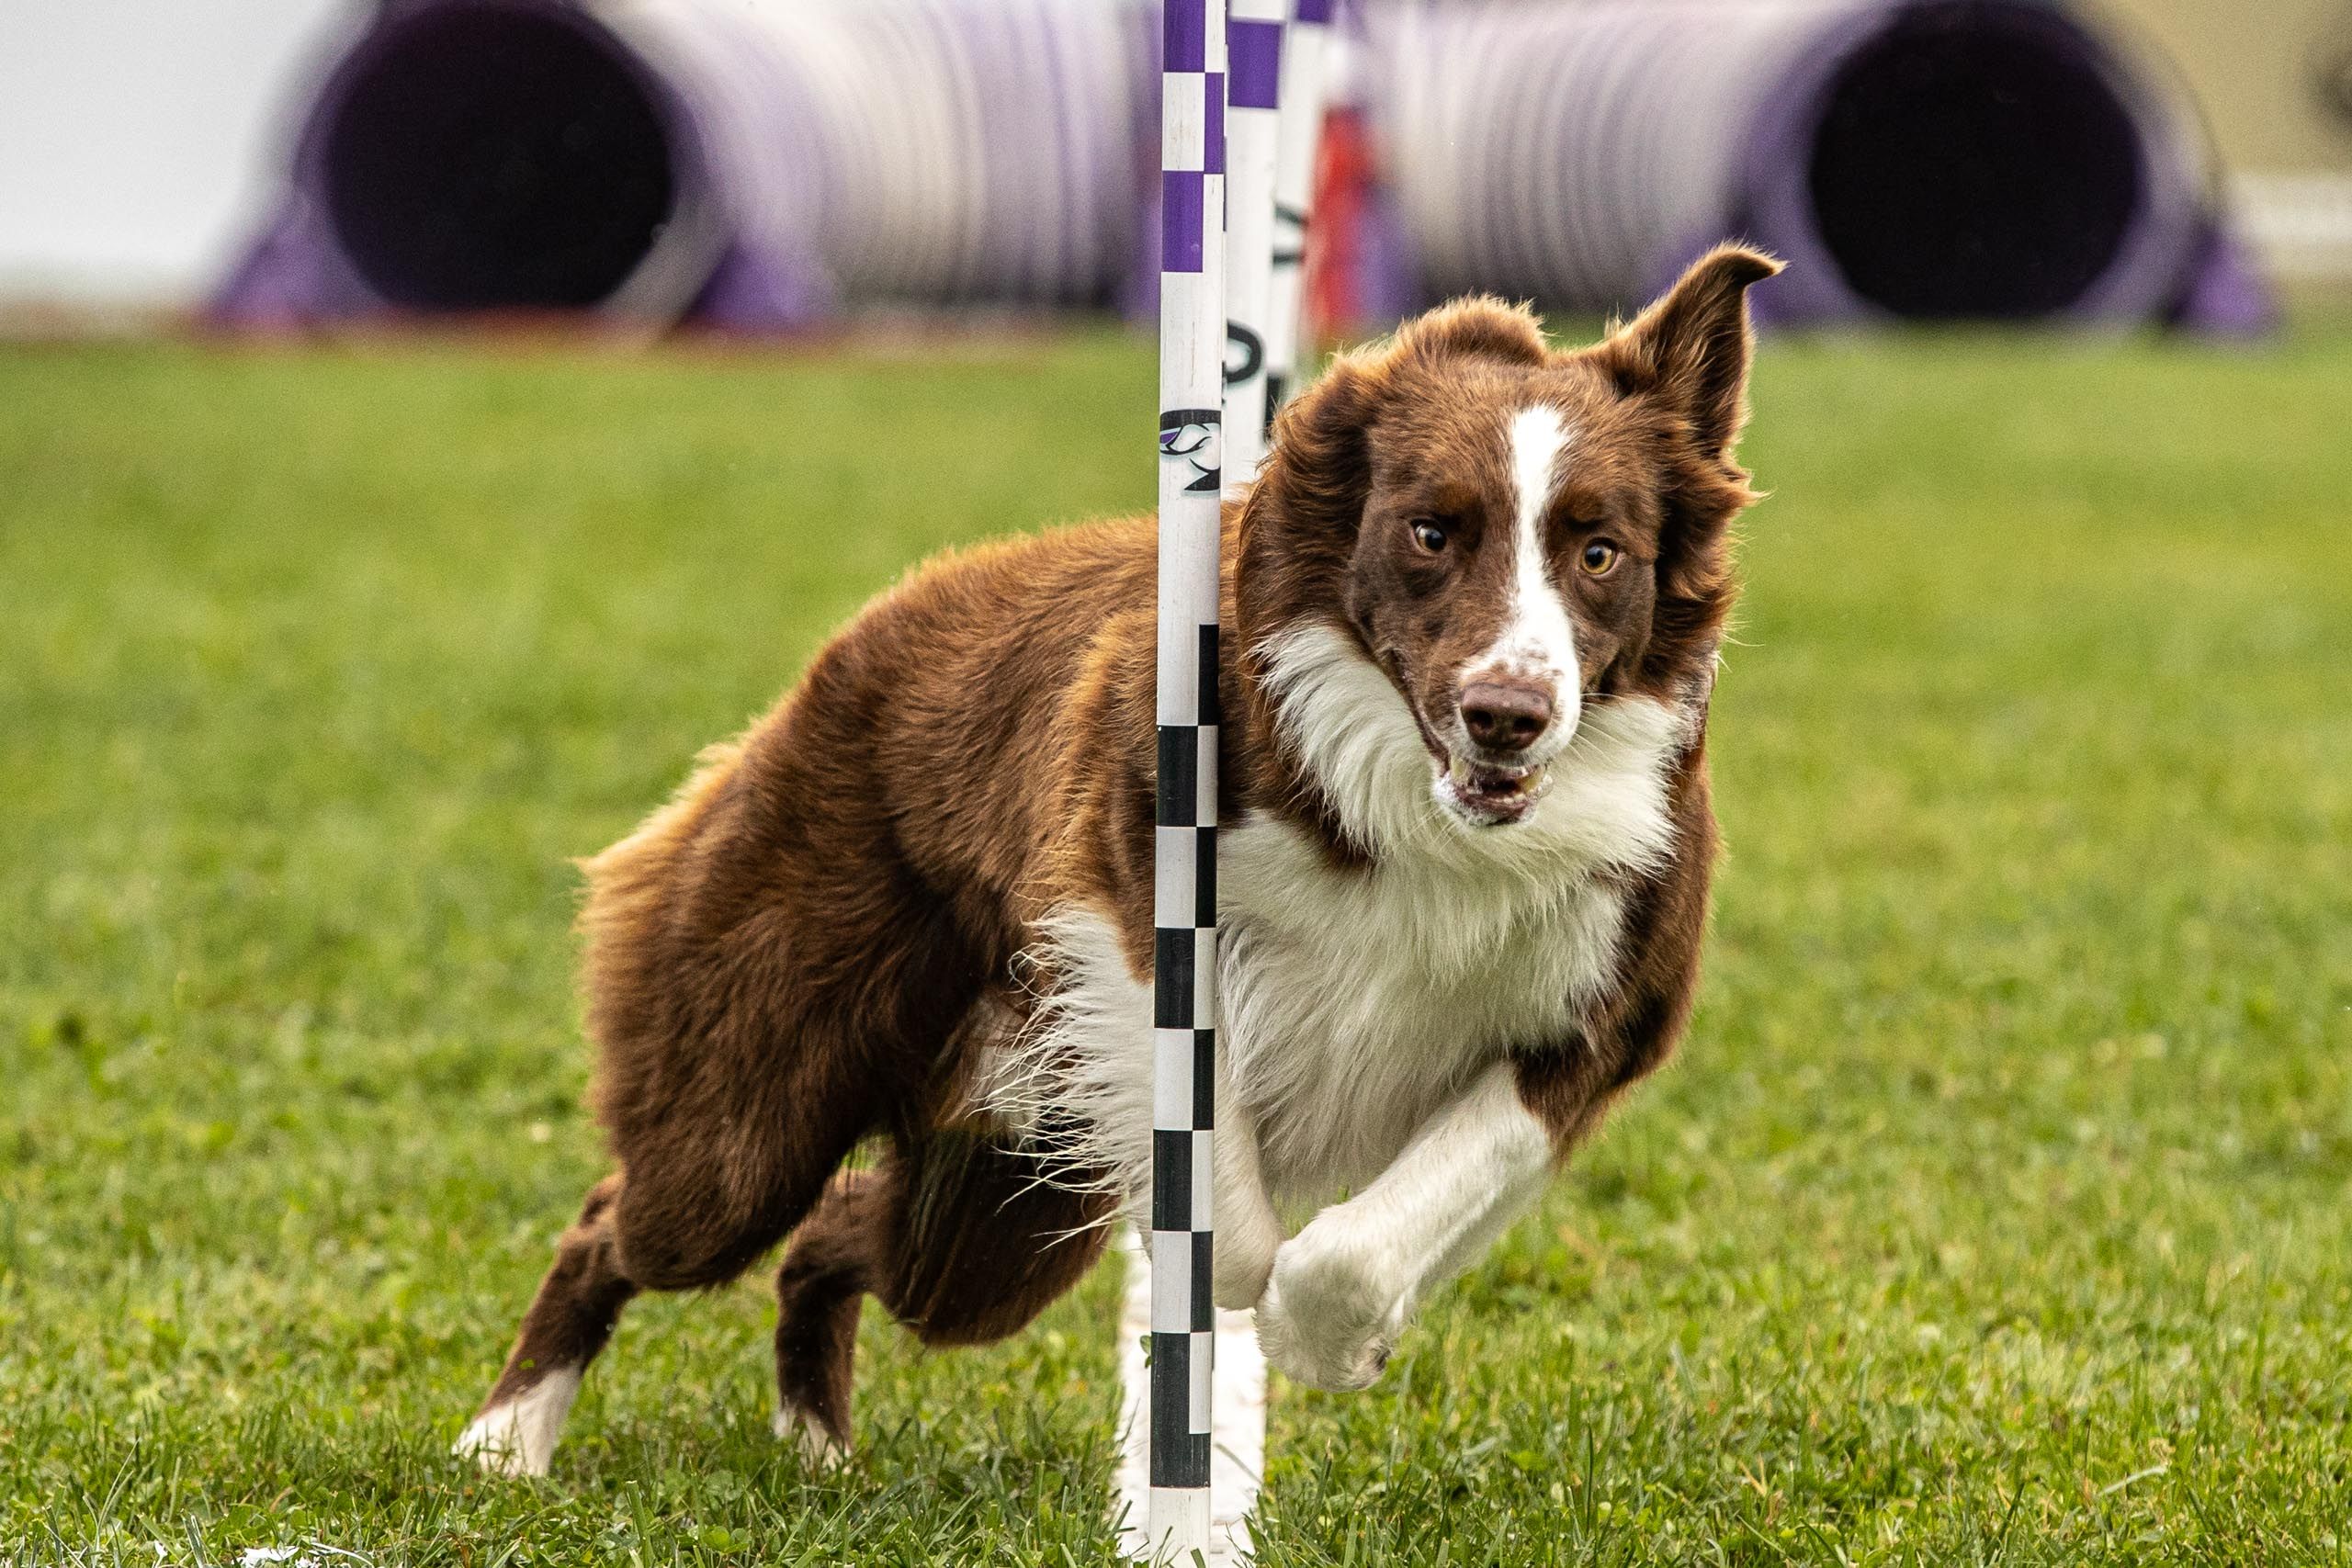 Dog Competes in Obstacle Course